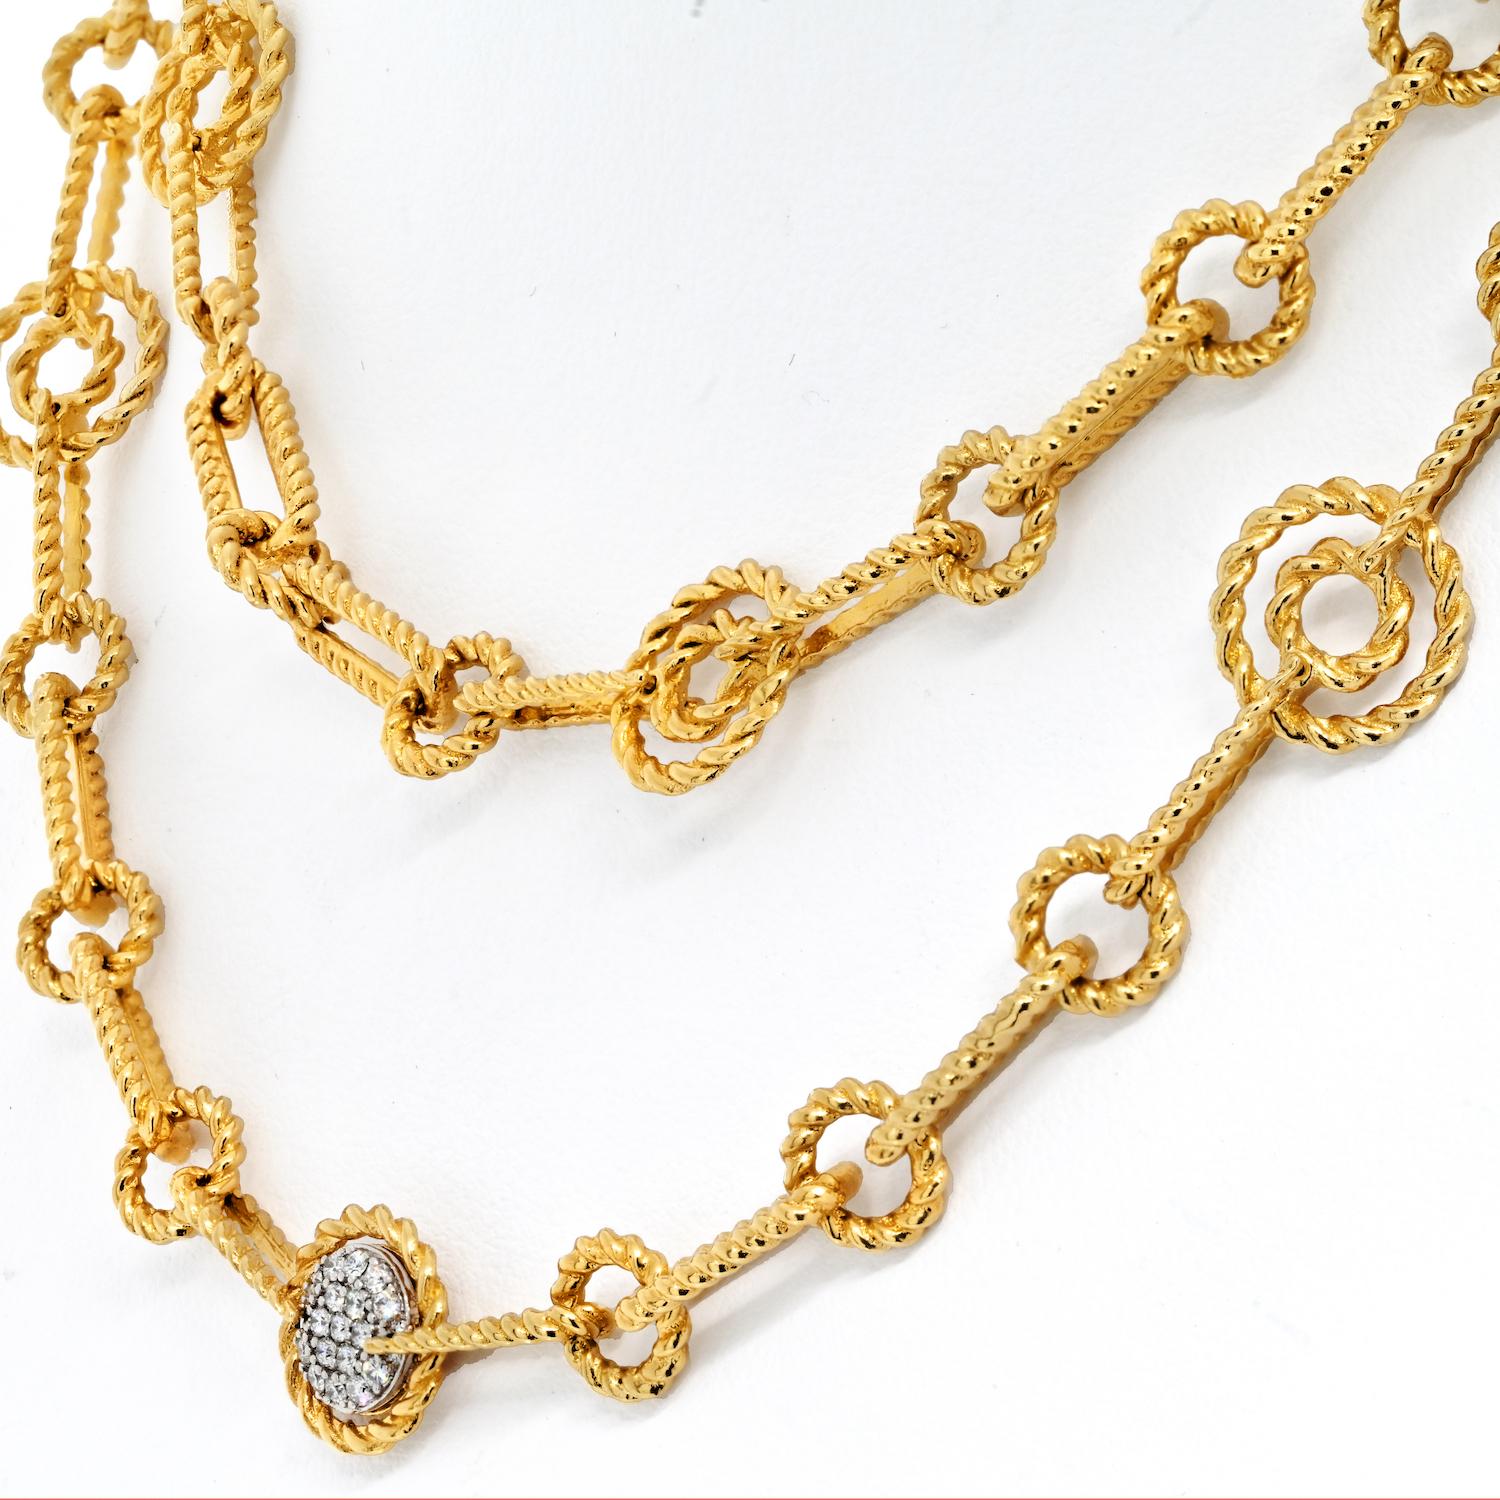 Women's Roberto Coin 18k Yellow Gold Twisted Rope Link Chain Necklace